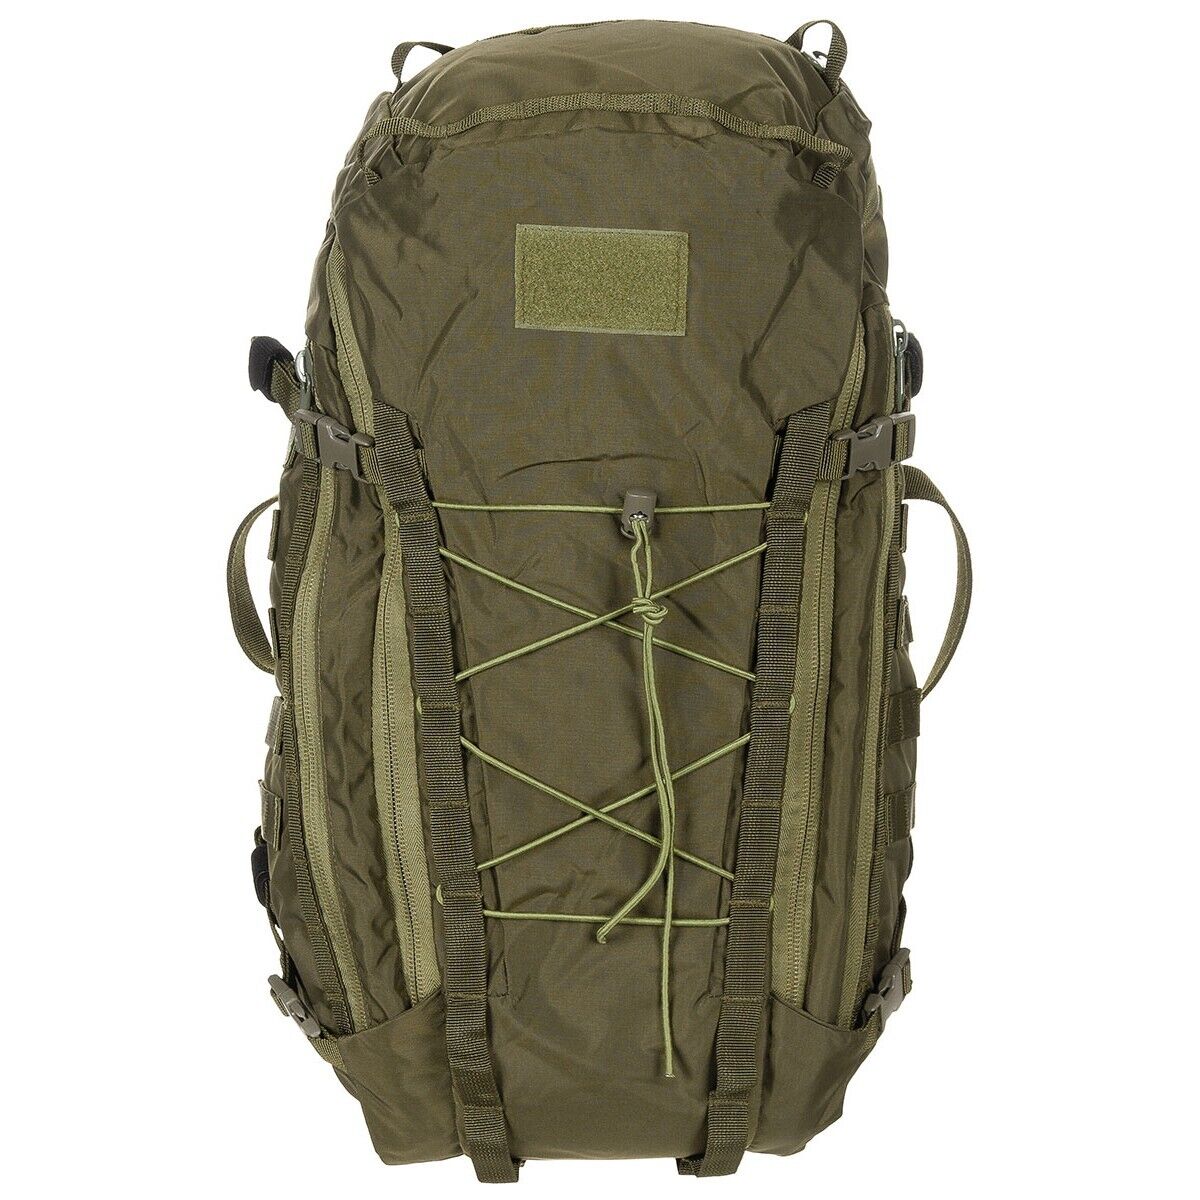 30L Outdoor Military Tactical Backpack "Mission 30", CORDURA® for Camping Hiking